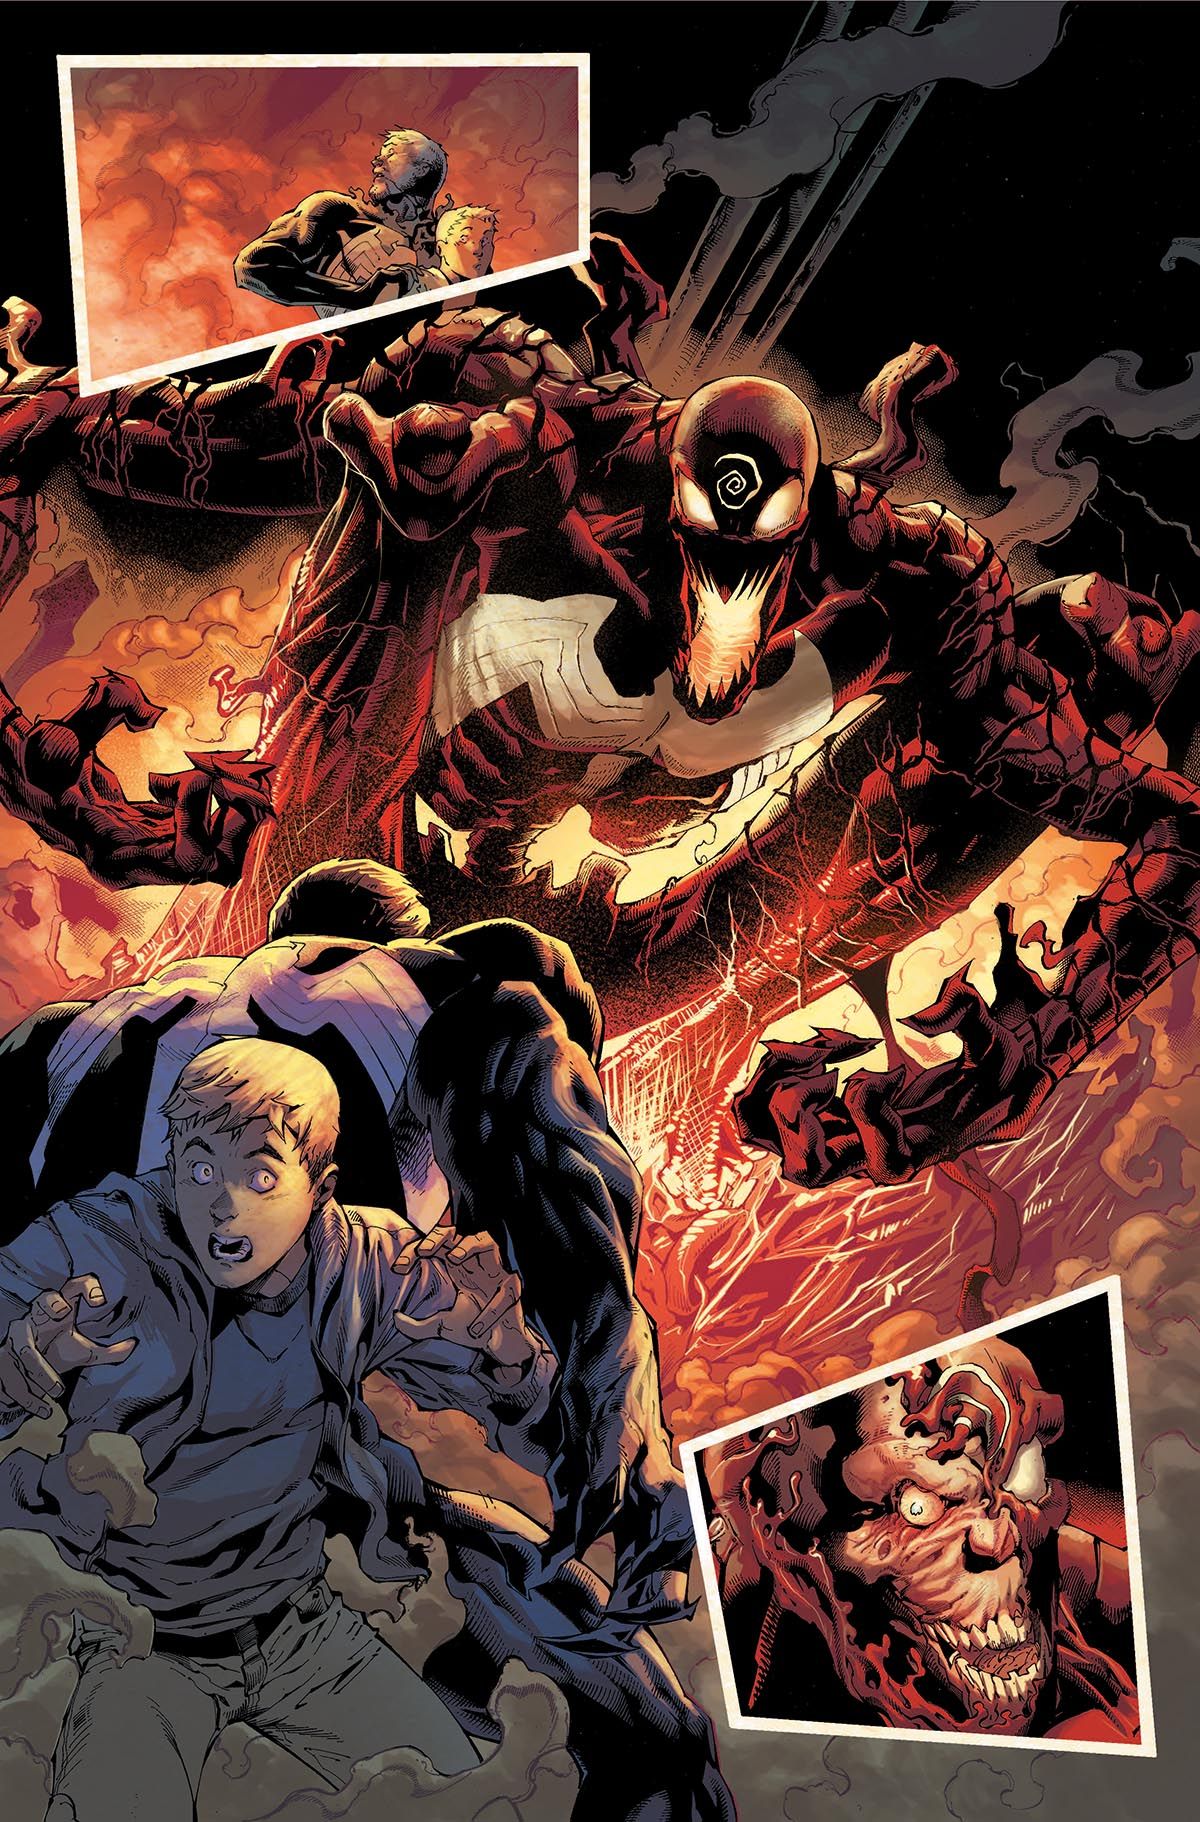 Kick Off The Symbiote Hunt With A Limited Time Digital Director's Cut Of ABSOLUTE CARNAGE !